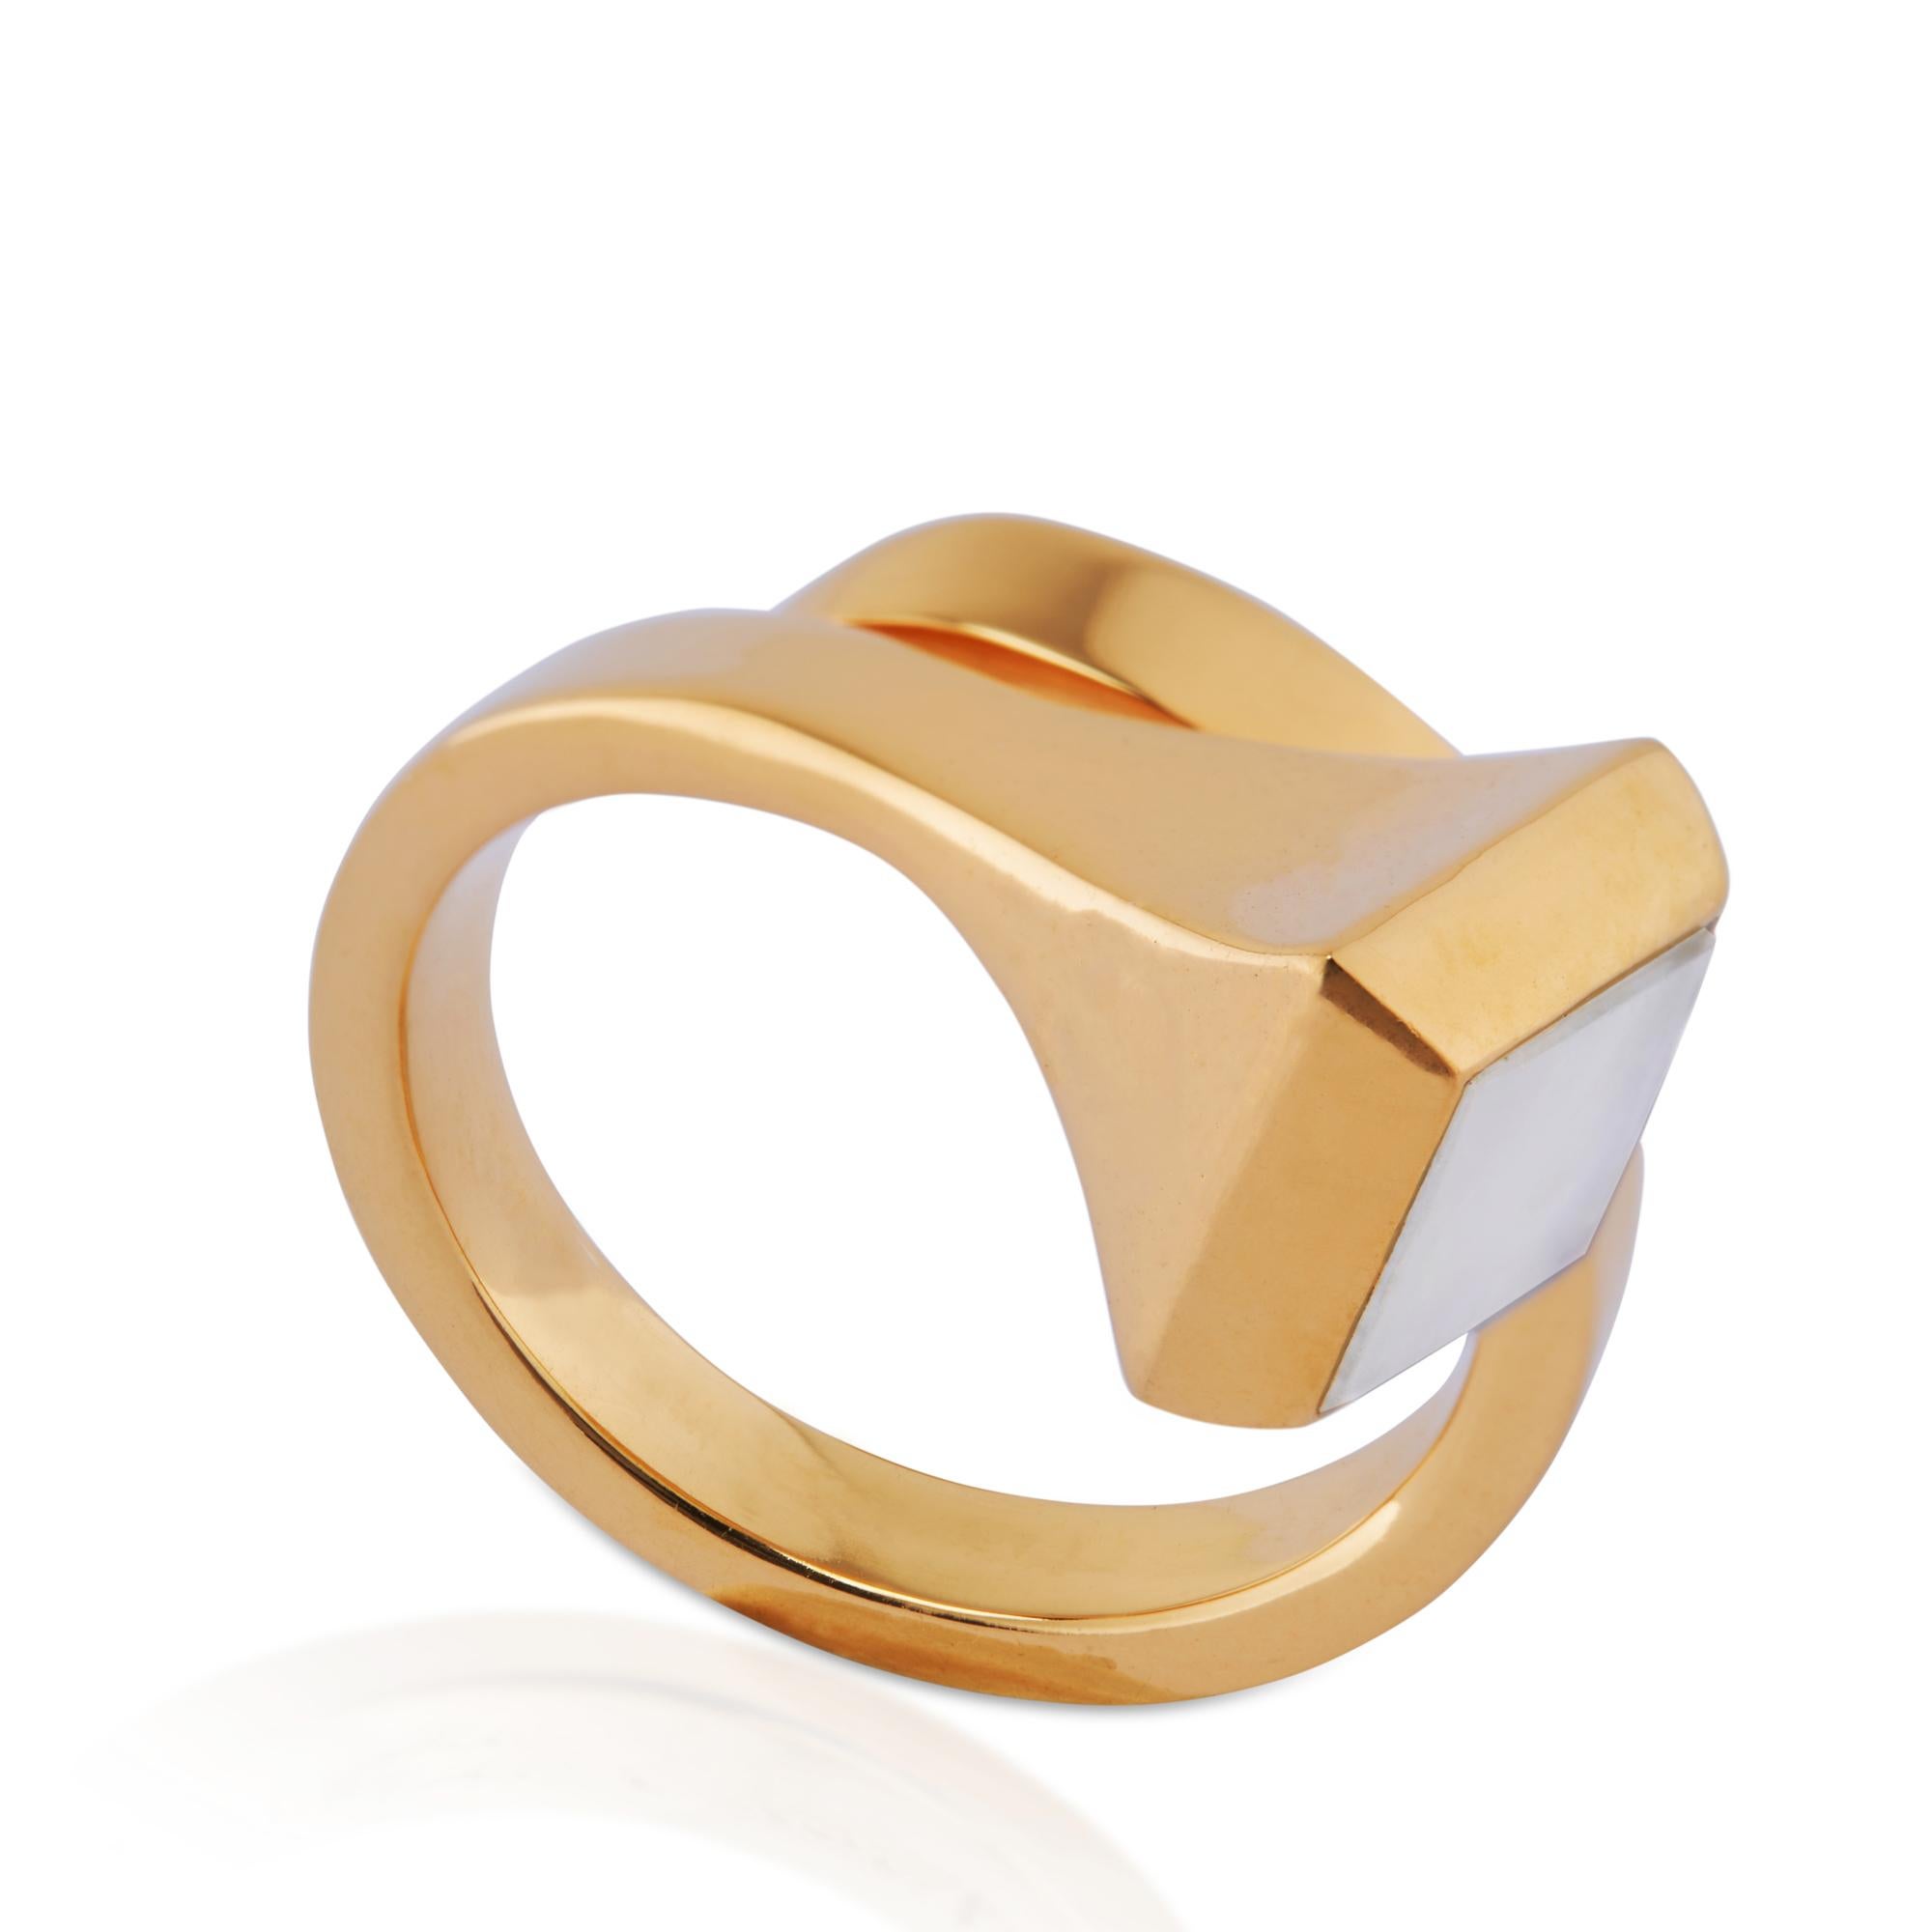 Unisex ring in 18k yellow gold vermeil, set with rainbow moonstone, square cut, 1.30 carat, a gemstone with a meaning of enhancing mental power
Size UK Q - US 8 1/4 in stock, more sizes available upon request, made to order items aren't